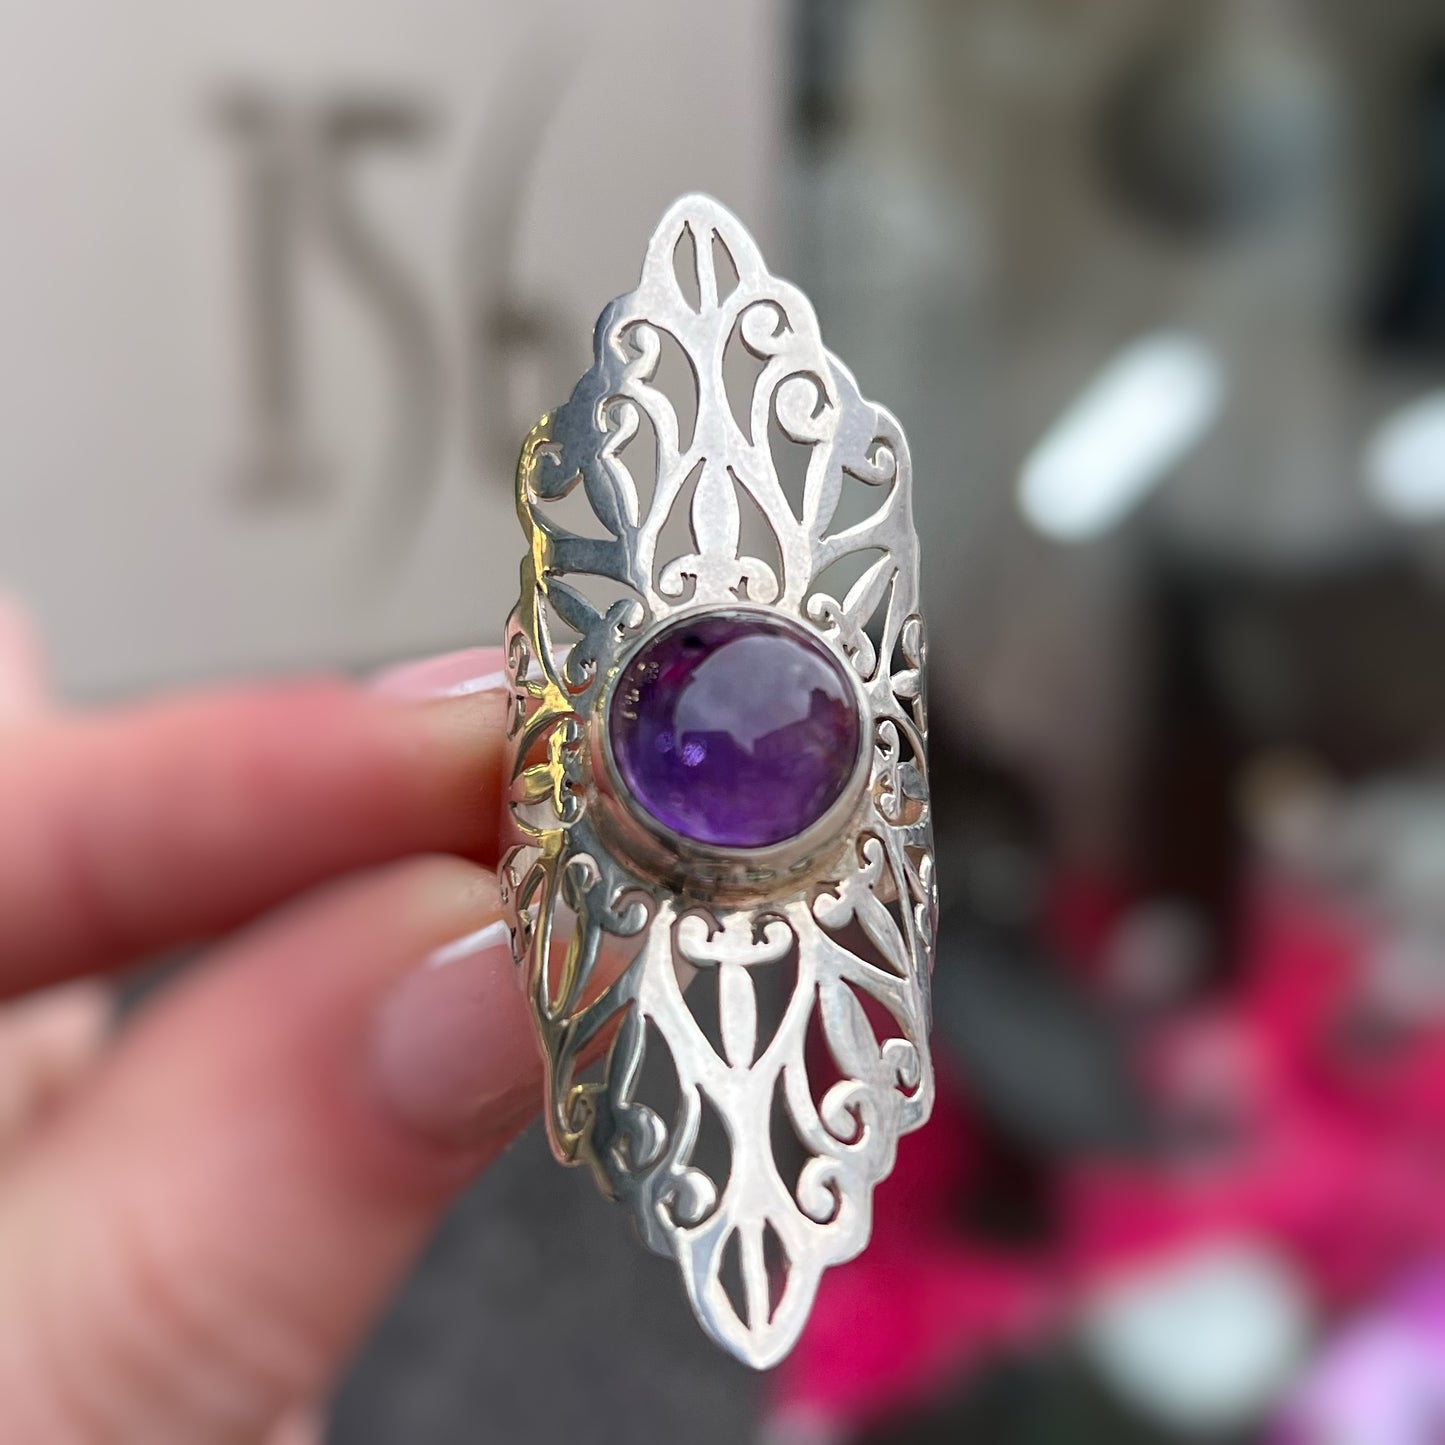 Statement Sterling Silver Pierced Out Amethyst Cabochon Ring - Size P1/2